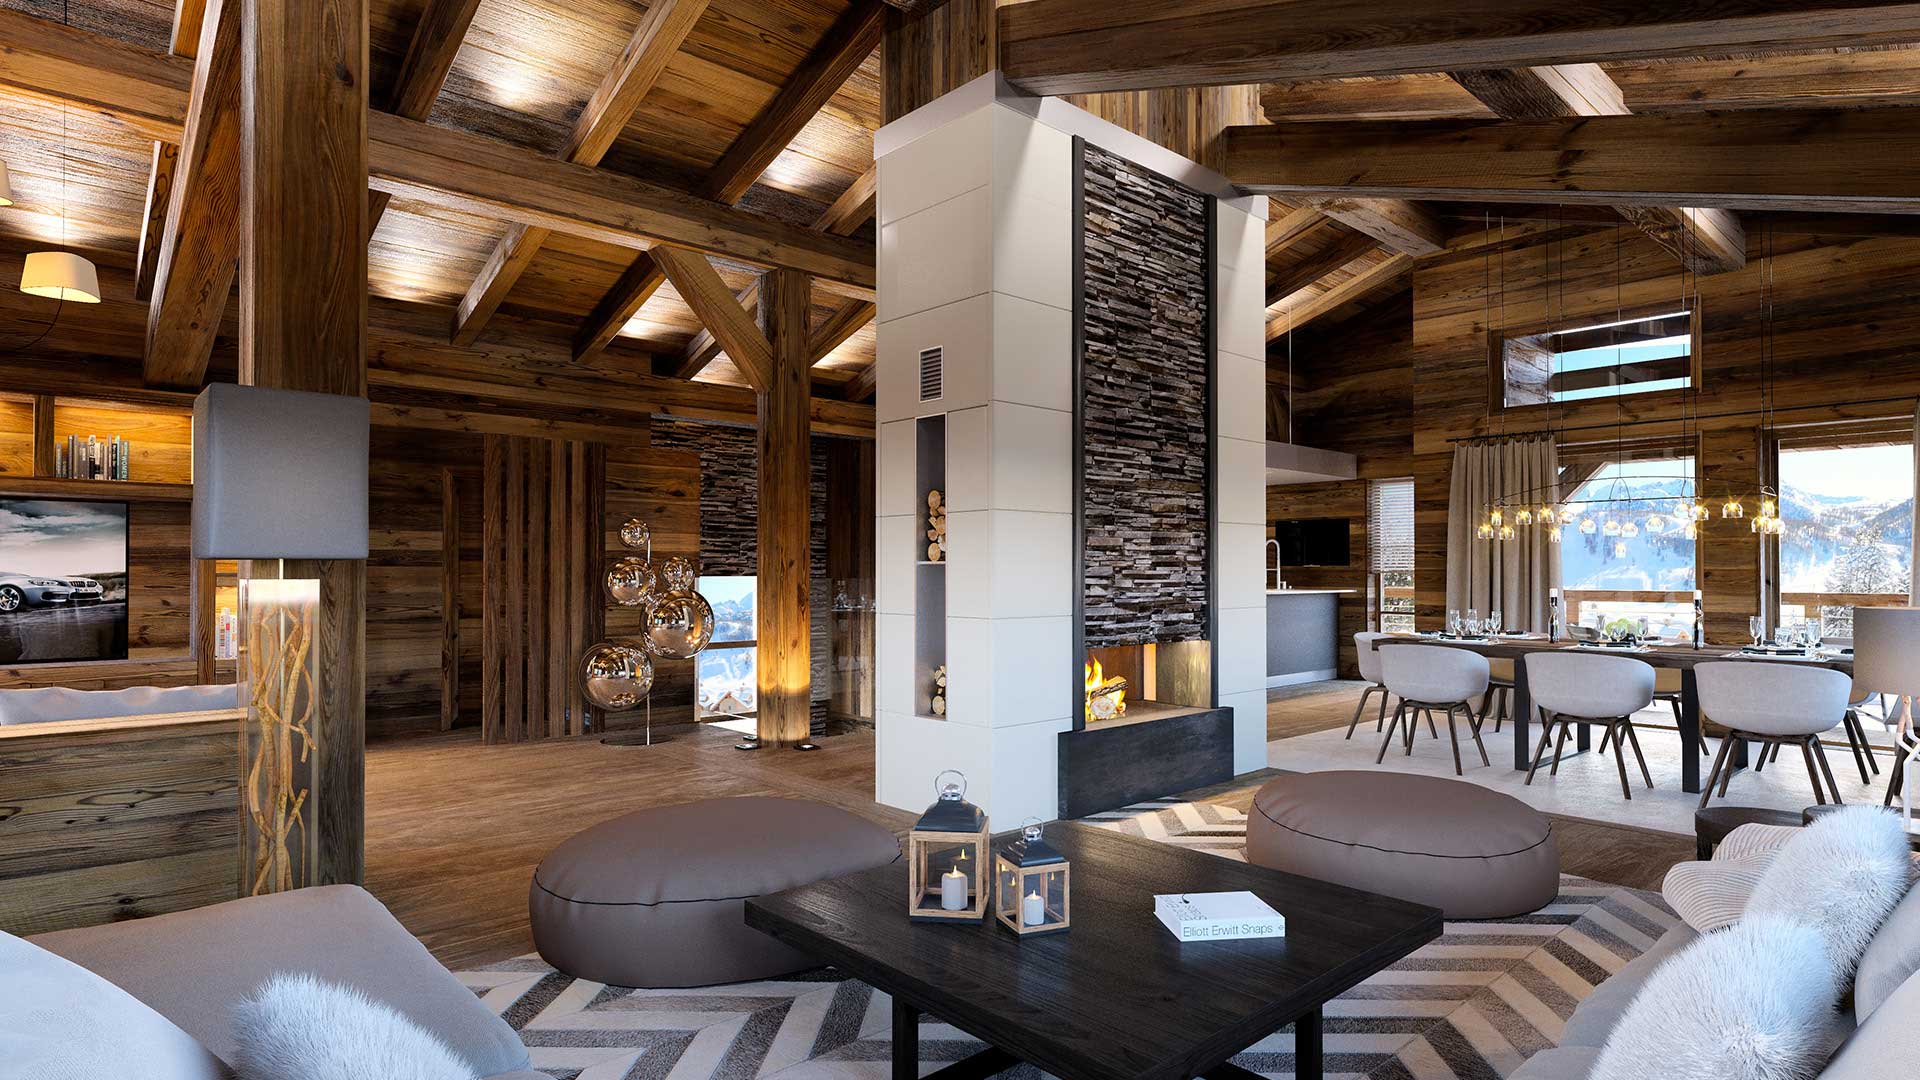 Creation of a 3D computer generated image of a luxurious chalet in Courchevel for real estate promotion.